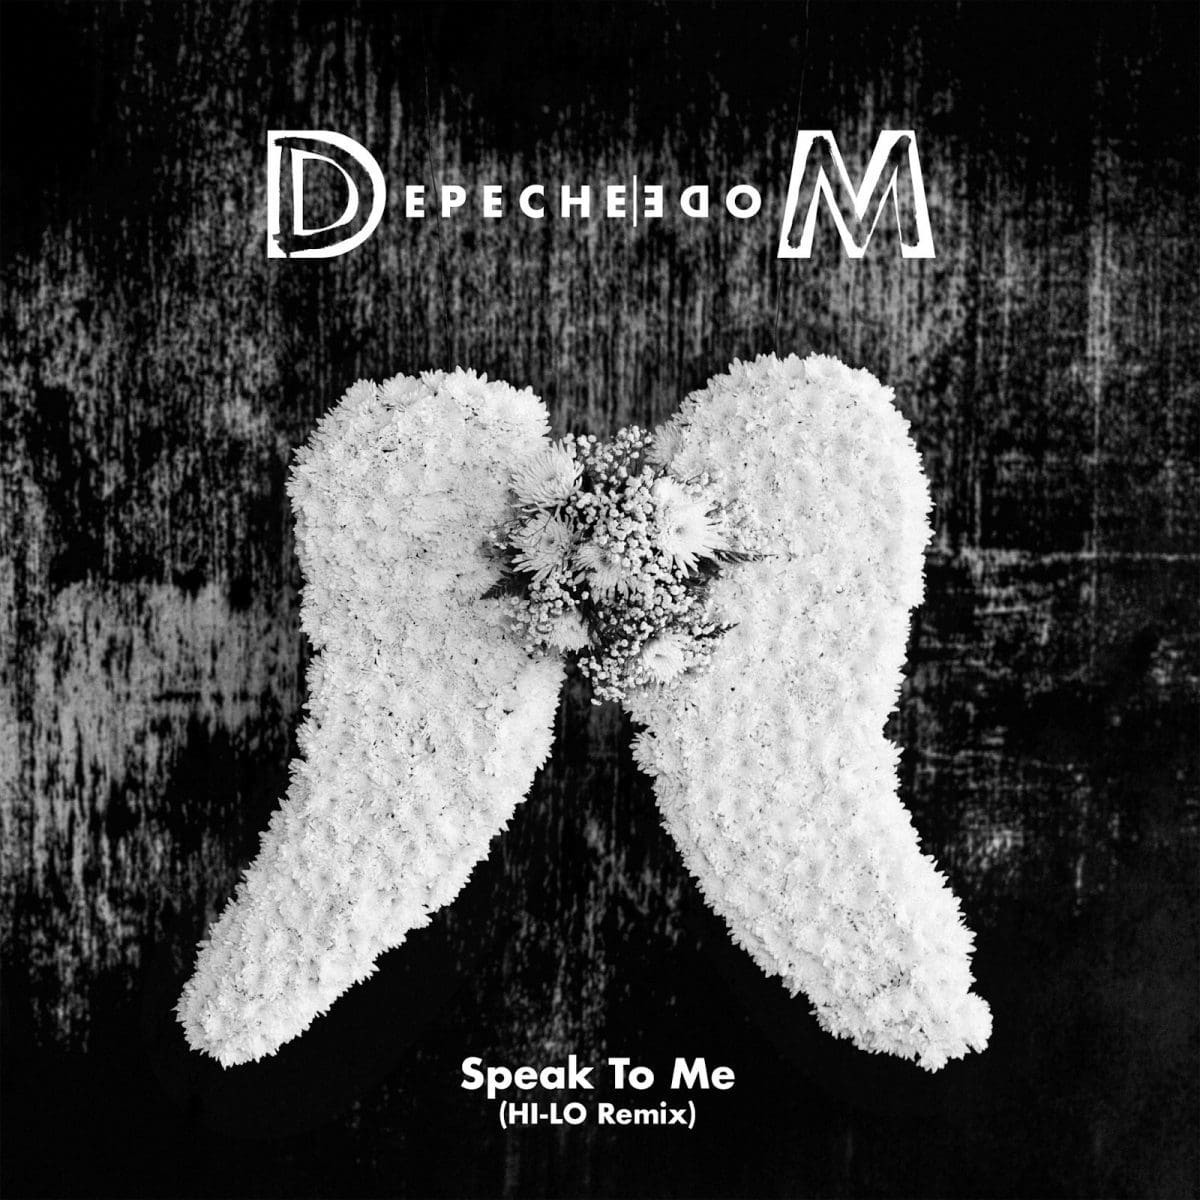 HI-LO presents his remix of Depeche Mode’s 'Speak To Me' - available now on Columbia Records